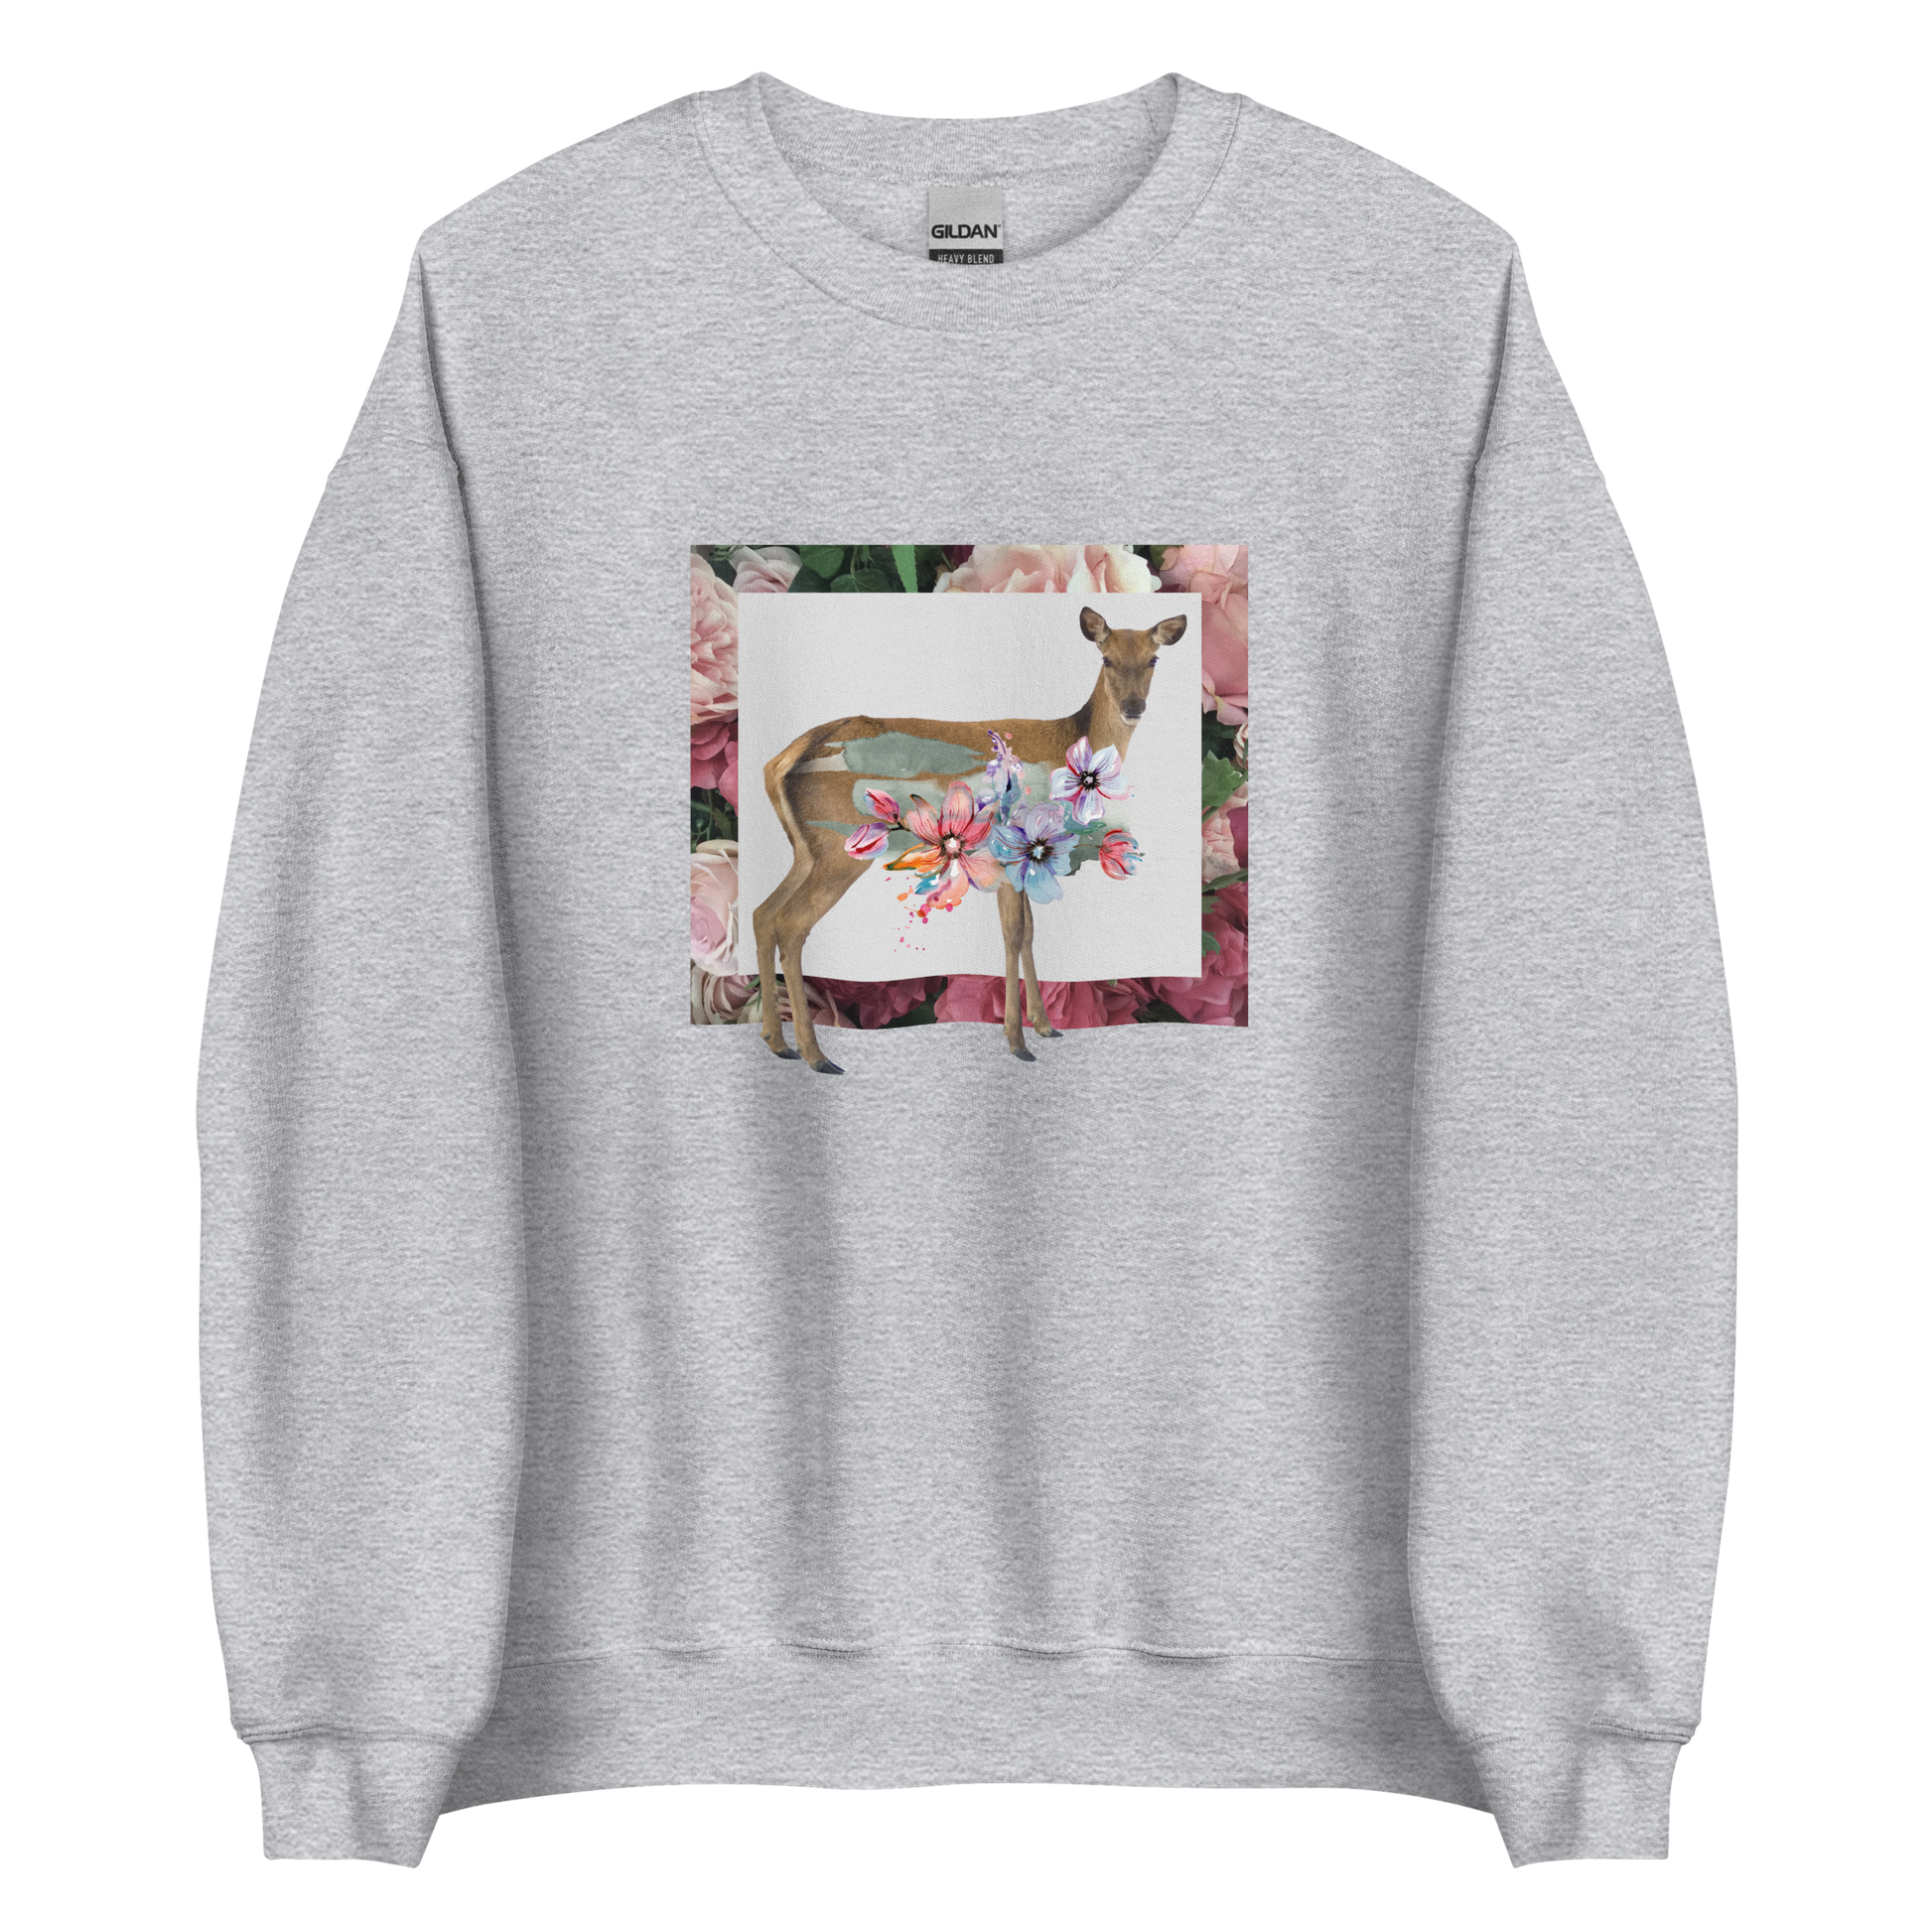 Sport Grey Floral Deer Sweatshirt featuring a beautifully detailed vibrant Floral Deer graphic on the chest - Cute Graphic Deer Sweatshirts - Boozy Fox